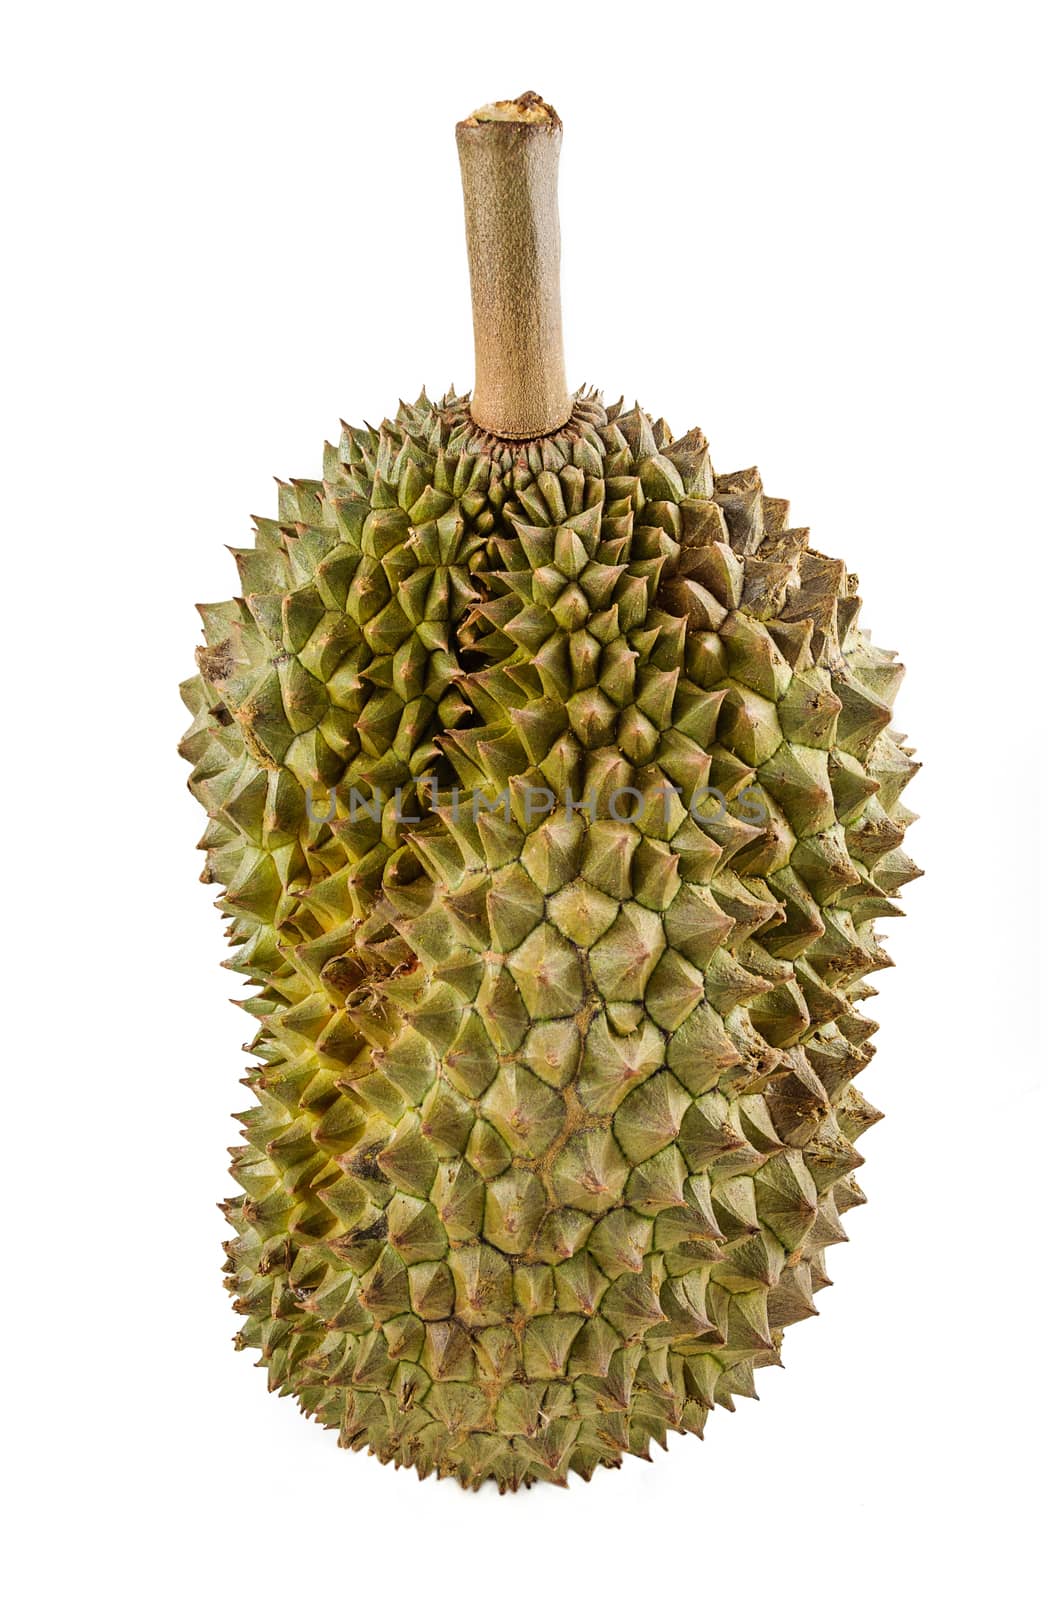 Durian, the king of fruits of South East Asia isolated on white background.